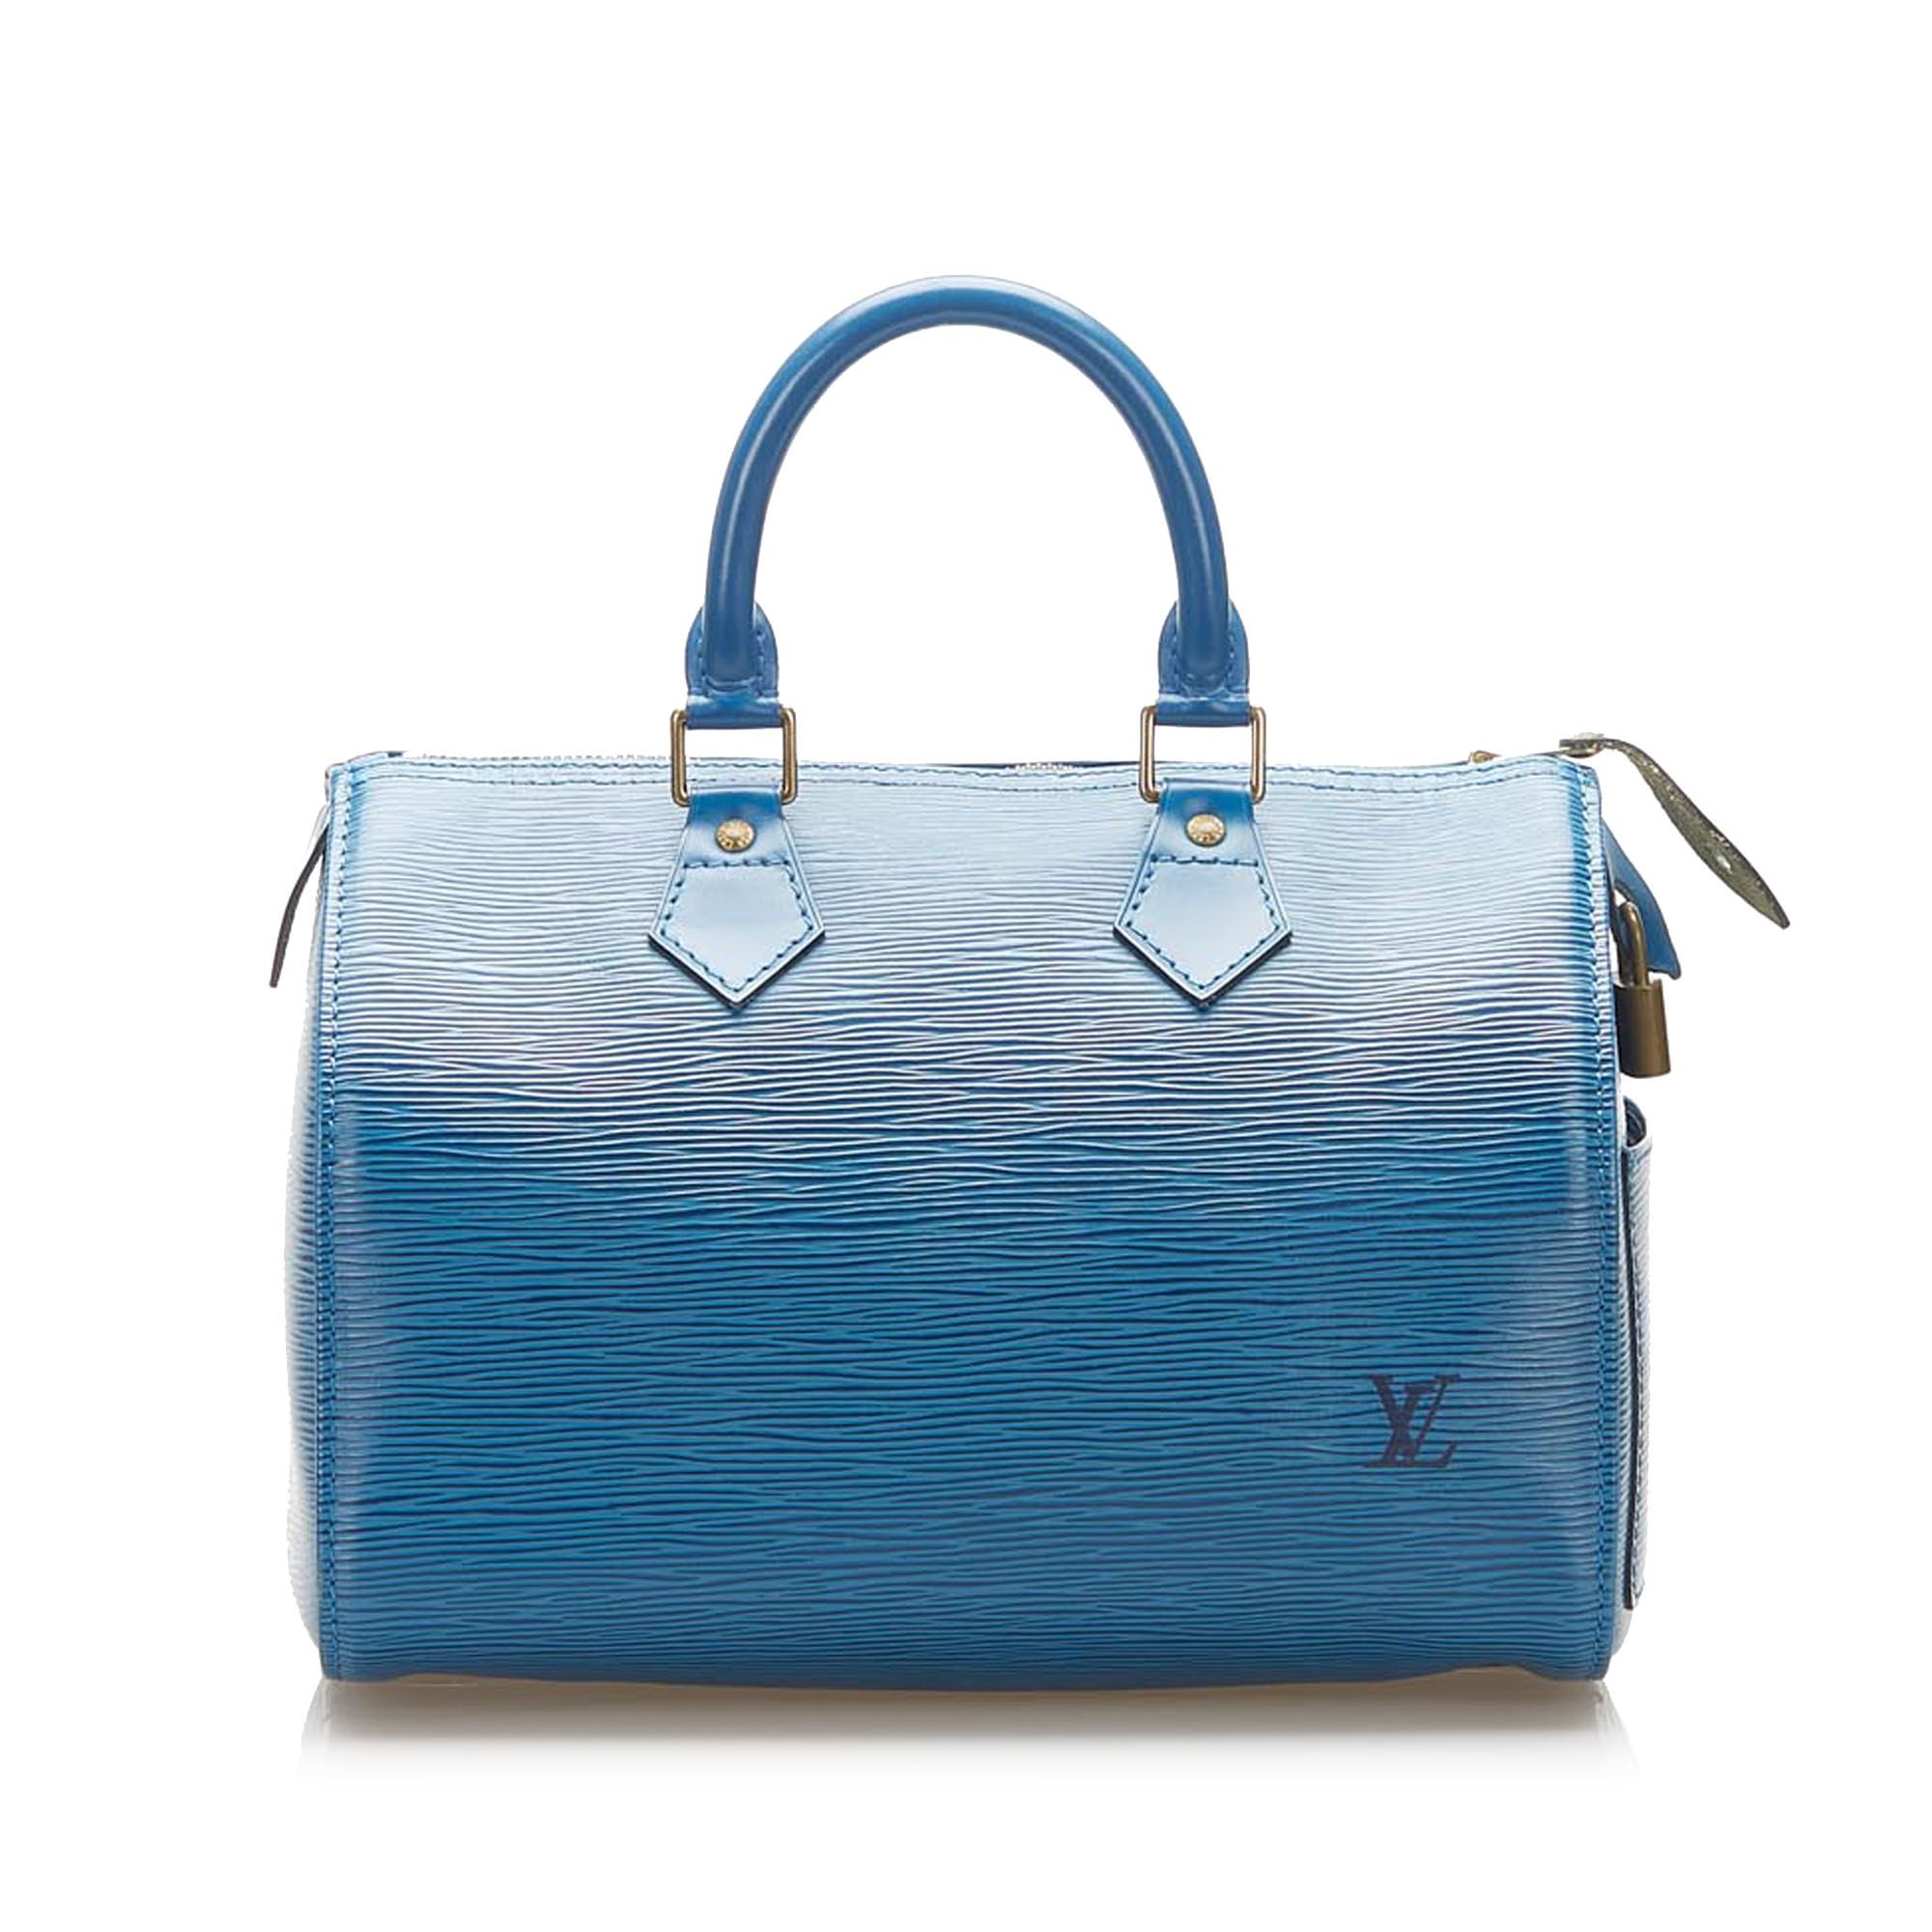 VINTAGE. RRP AS NEW. The Speedy 25 features an epi leather body, an exterior side slip pocket, rolled handles, a top zip closure, and an interior slip pocket.
Dimensions:
Length 19cm
Width 25cm
Depth 15cm
Hand Drop 10cm
Shoulder Drop 10cm

Original Accessories: Padlock

Color: Blue
Material: Leather x Epi Leather
Country of Origin: France
Boutique Reference: SSU95695K1342


Product Rating: GoodCondition